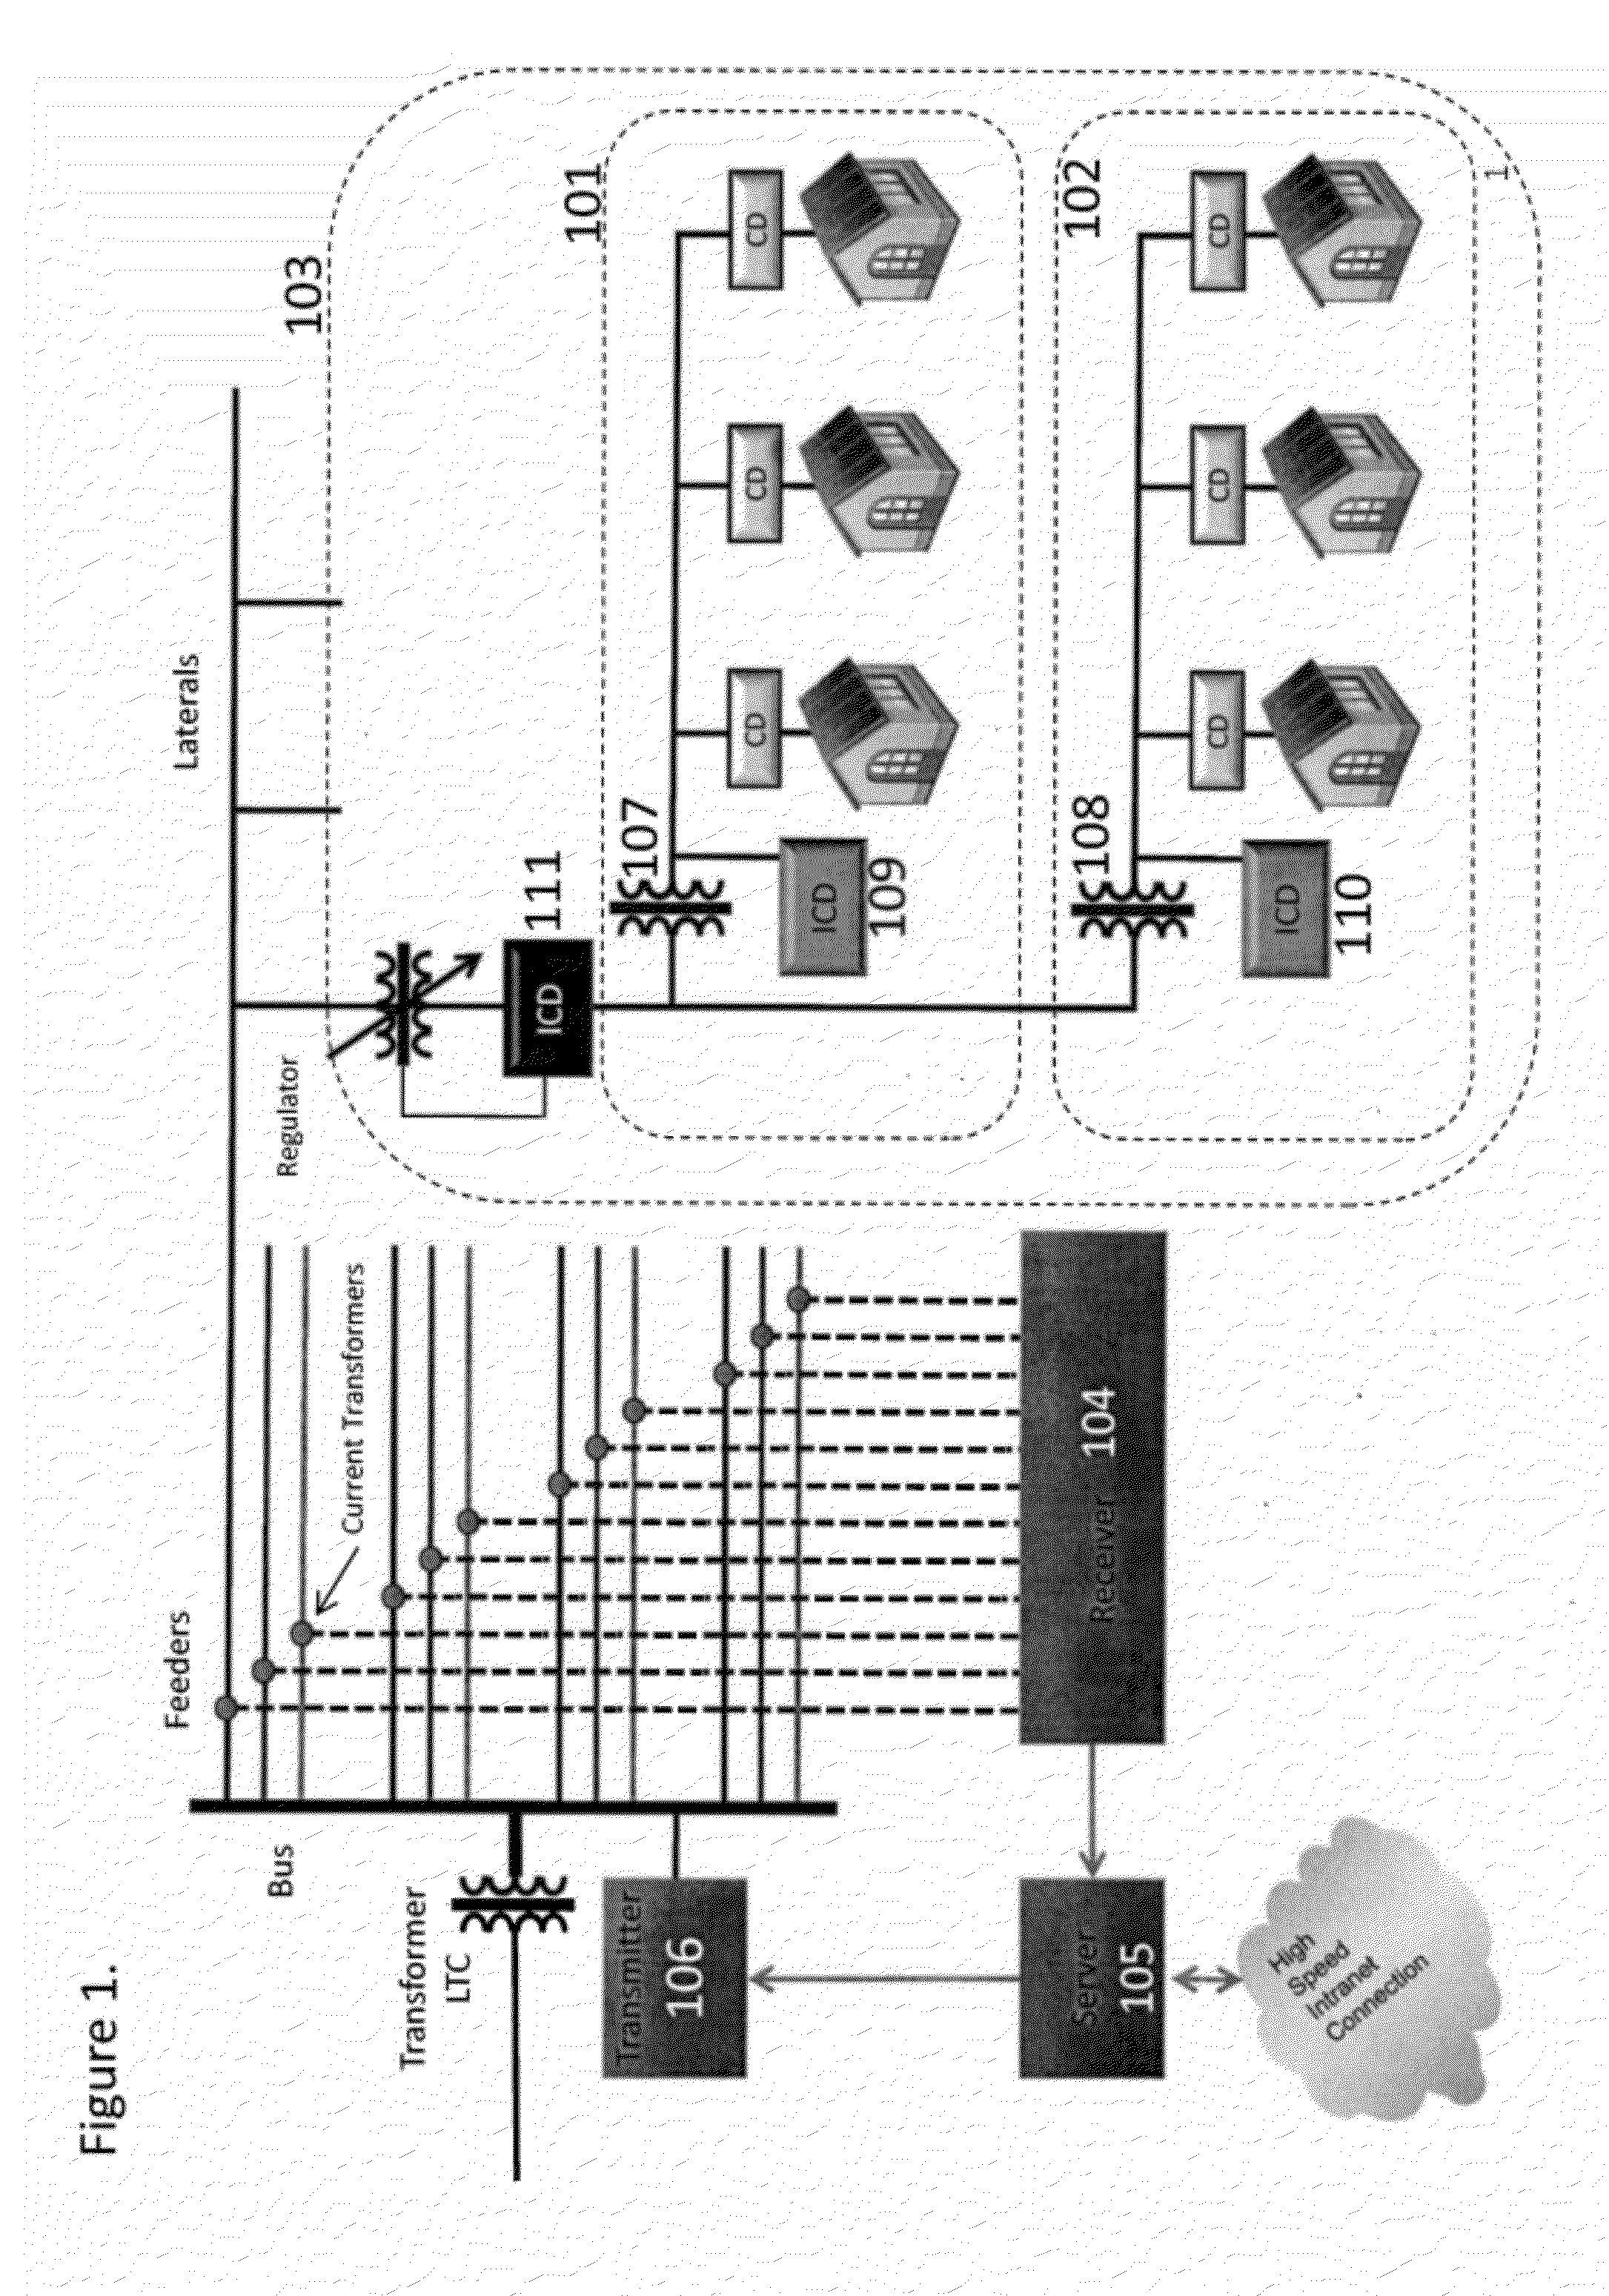 System and method for single and multizonal optimization of utility services delivery and utilization